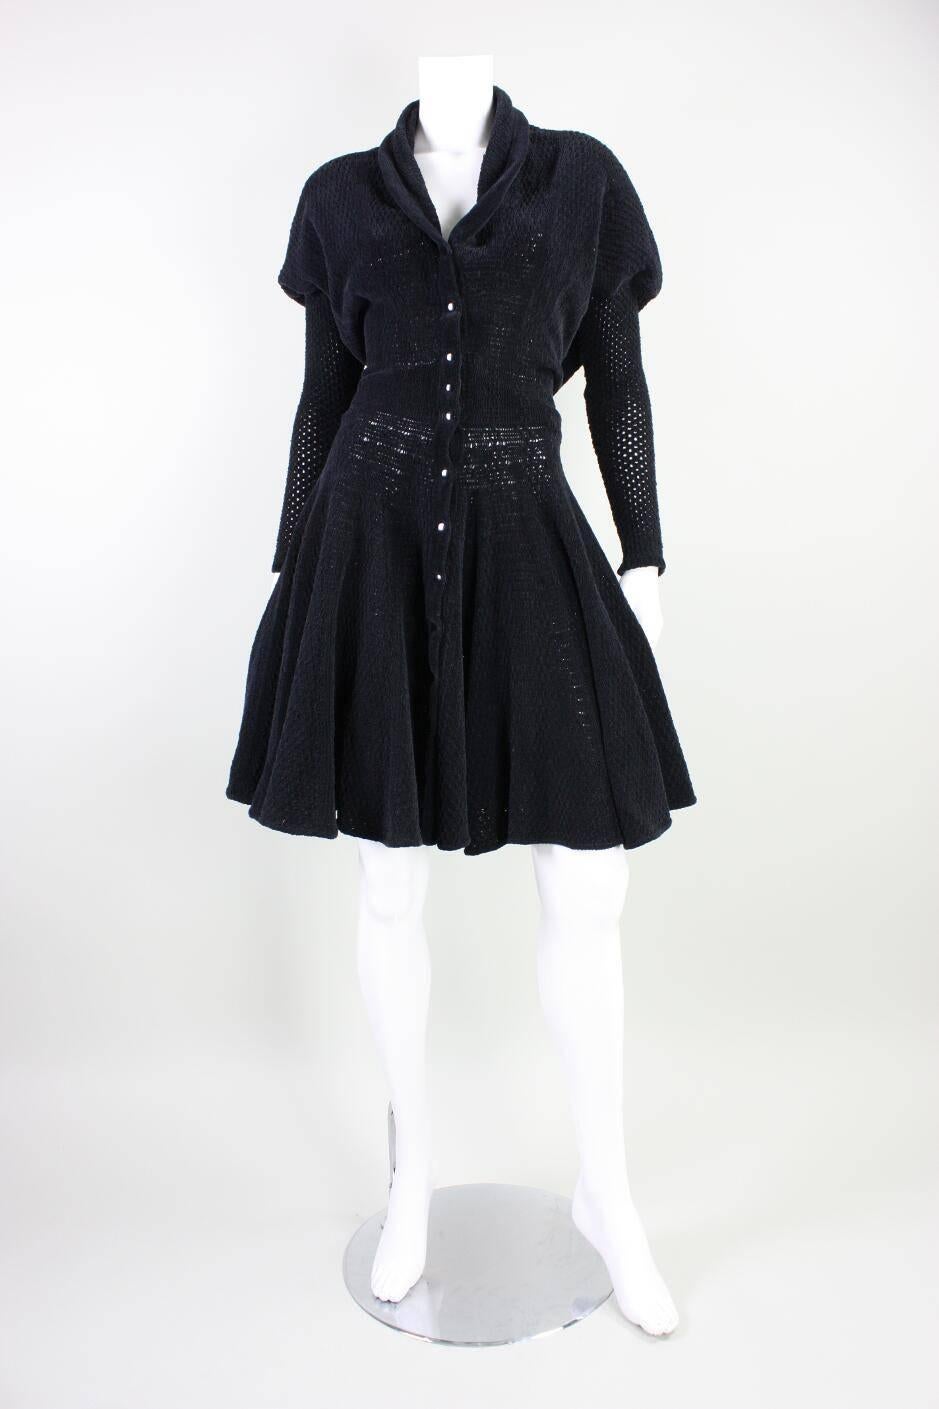 Vintage dress from Azzedine Alaia dates to the 1980's and is made of a soft cotton chenille.  Bodice has blouson styling that extends into the sleeves. Dress is fitted at the waist and has a full skirt.  Interior waistband.  Unlined.  Center front